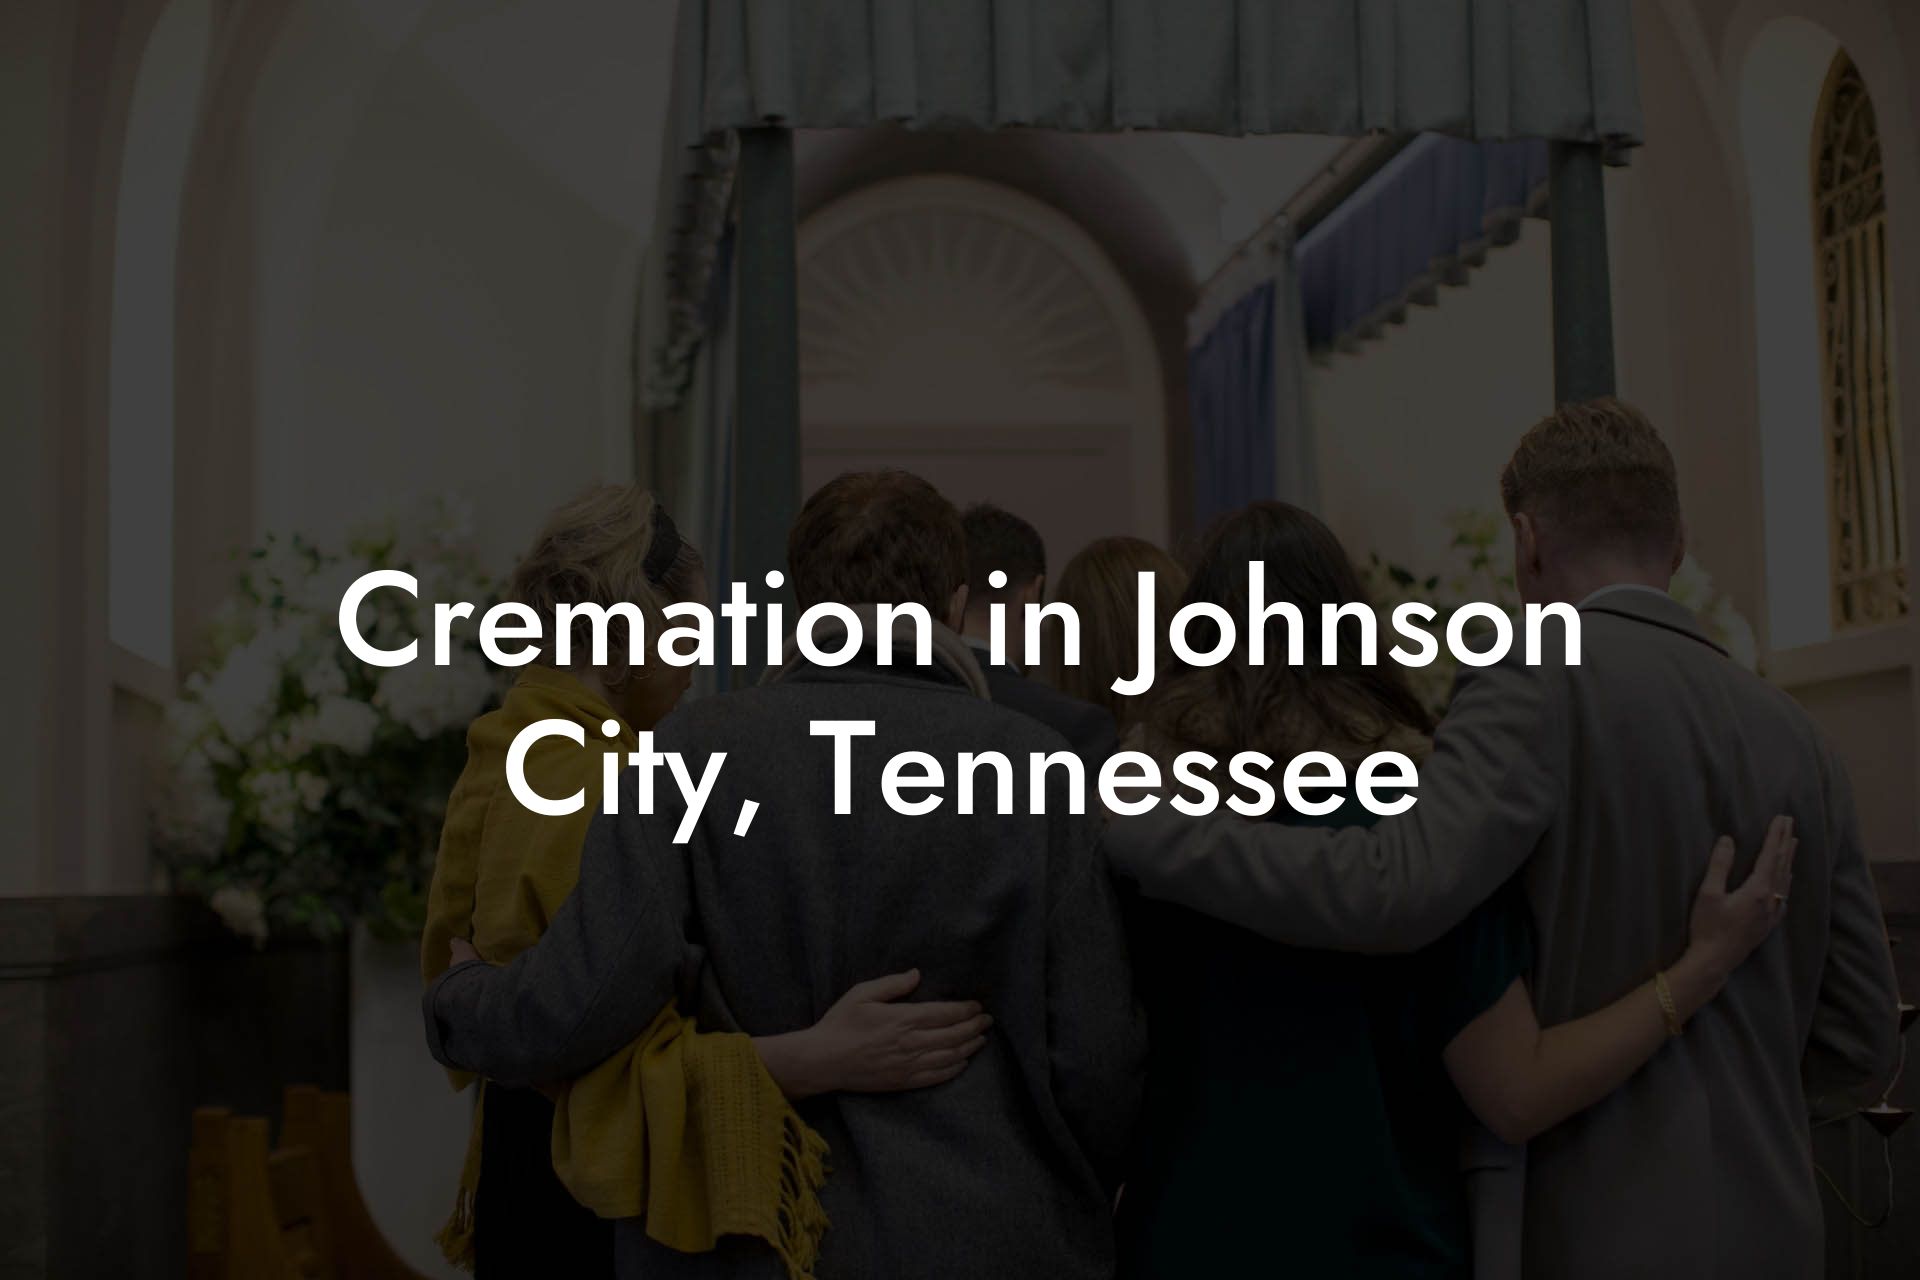 Cremation in Johnson City, Tennessee